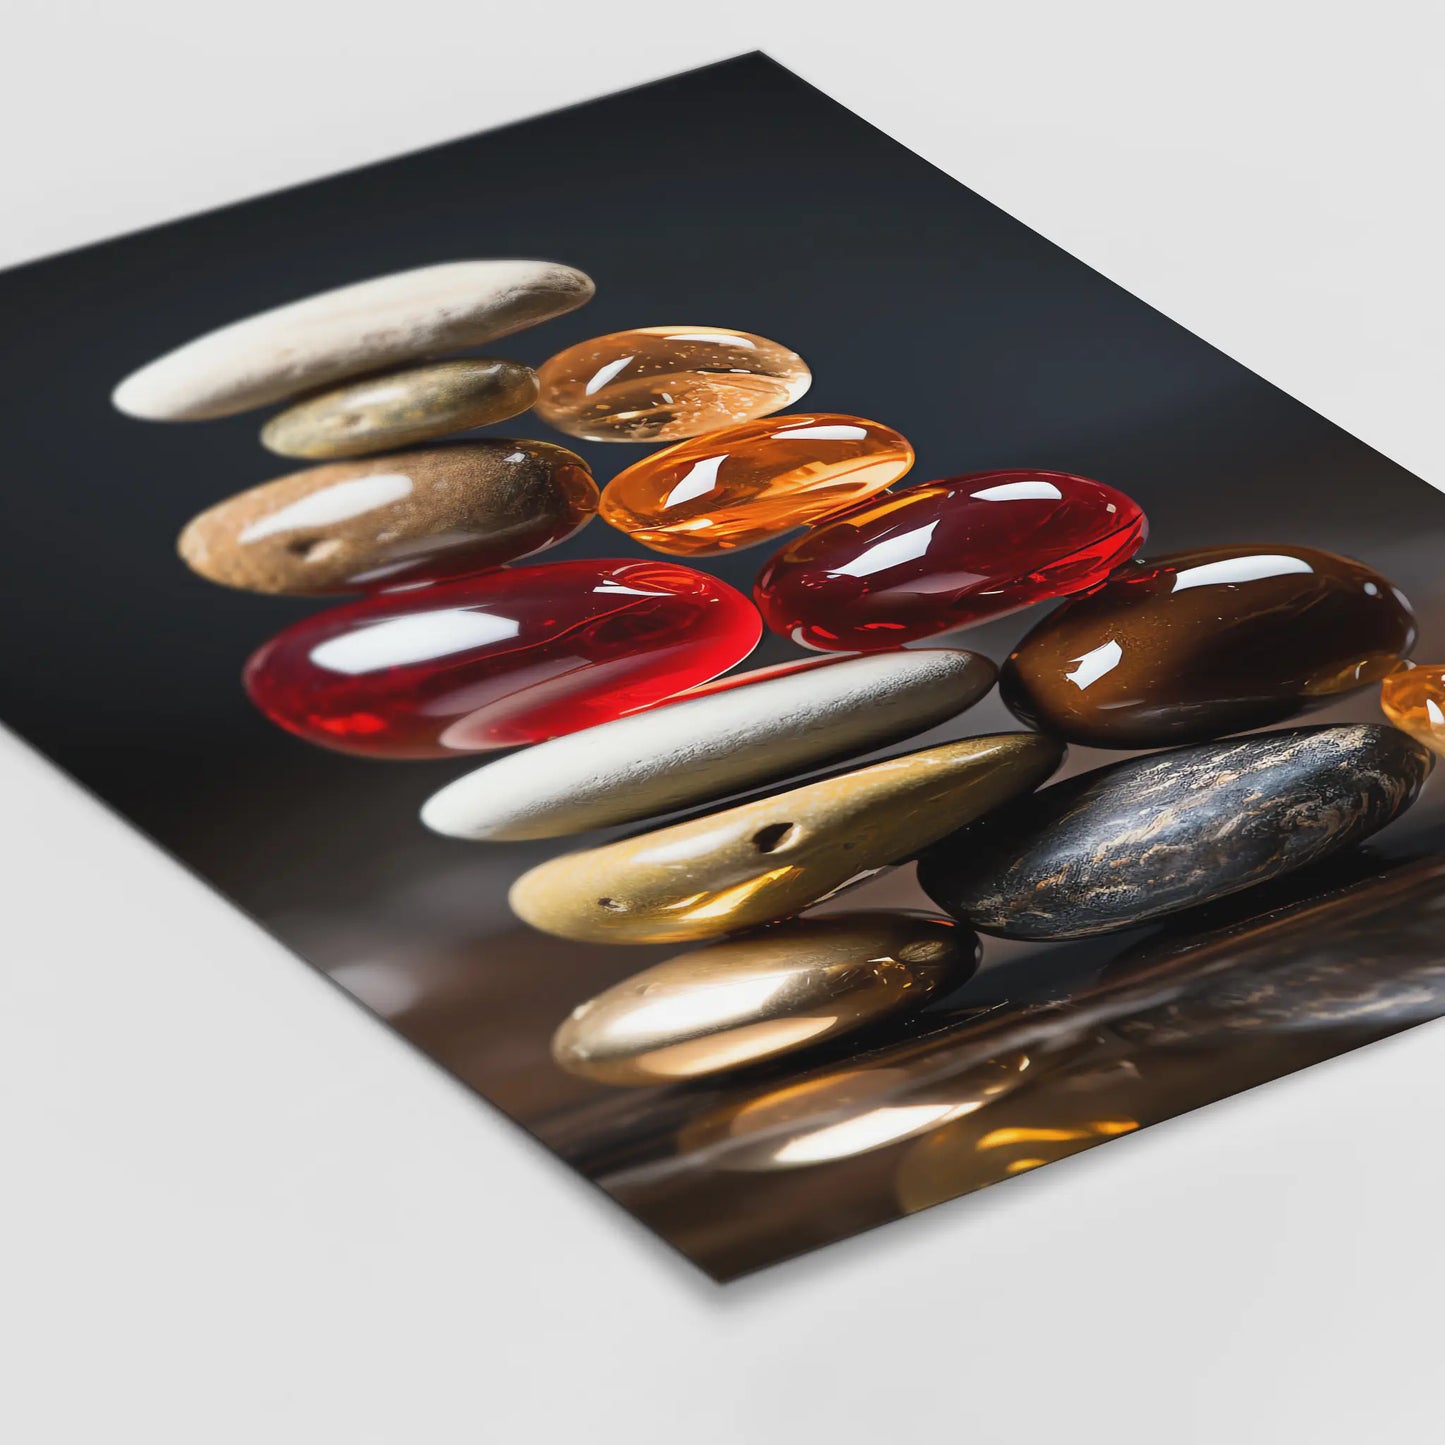 Red Zen Stones No 2 - Abstract Art - Perfectly Stacked Stones - Poster